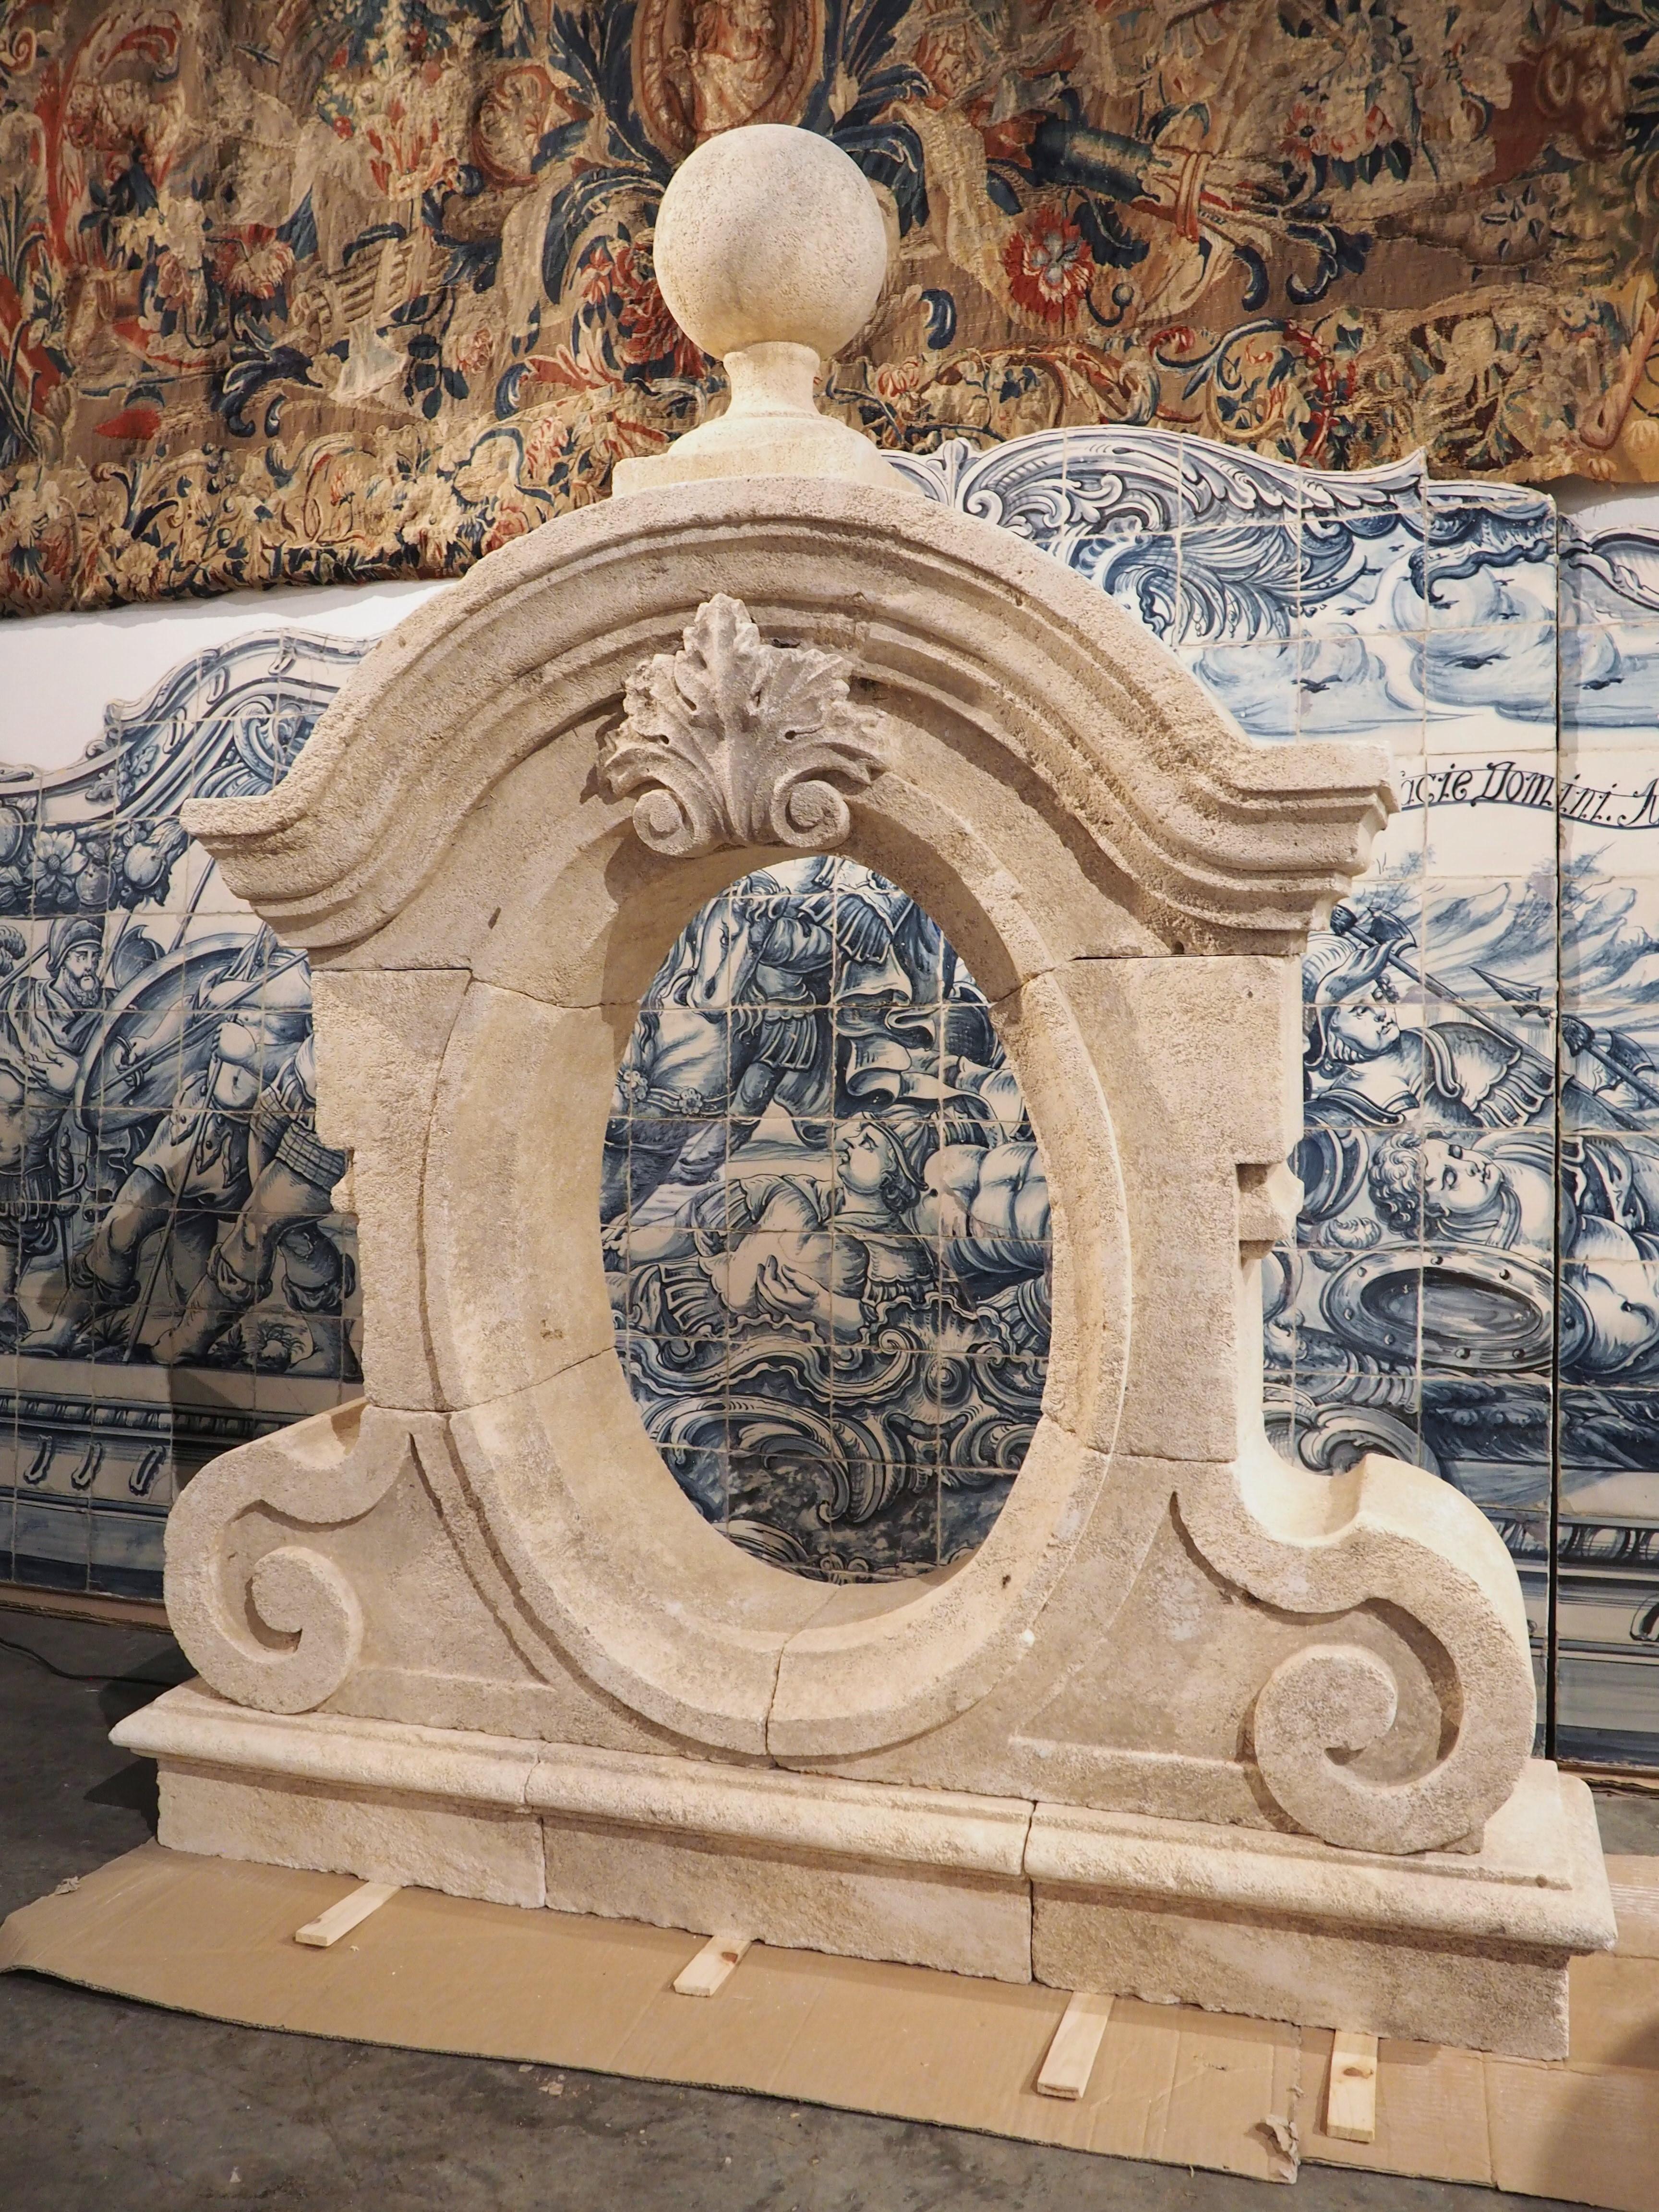 This lovely architectural element from Provence has several names: oeil-de-boeuf, chien-assis, dormer, and lucarne all of which are interchangeable. Comprised of nine pieces of limestone, the building component was designed to be installed on an